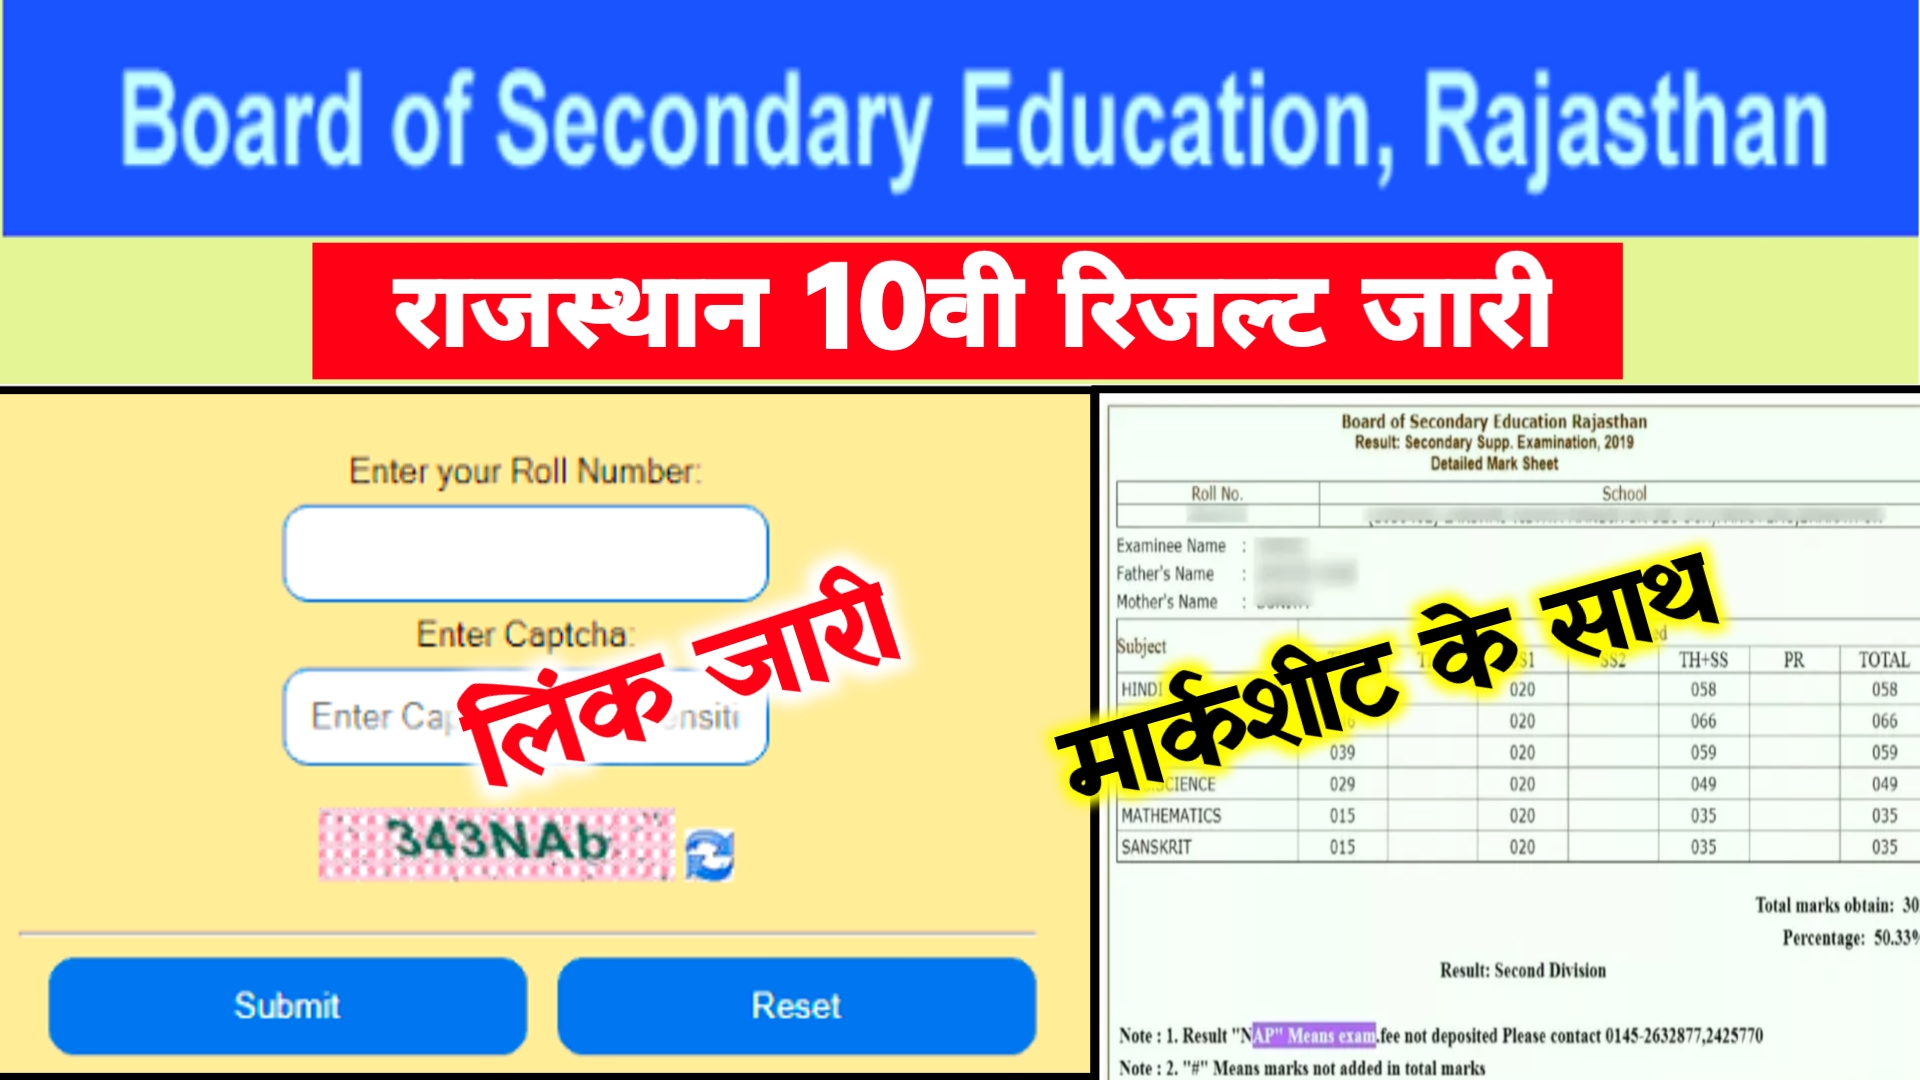 Rbse 10th Result 2022 Direct Link ~ Download Now @rajresults.nic.in